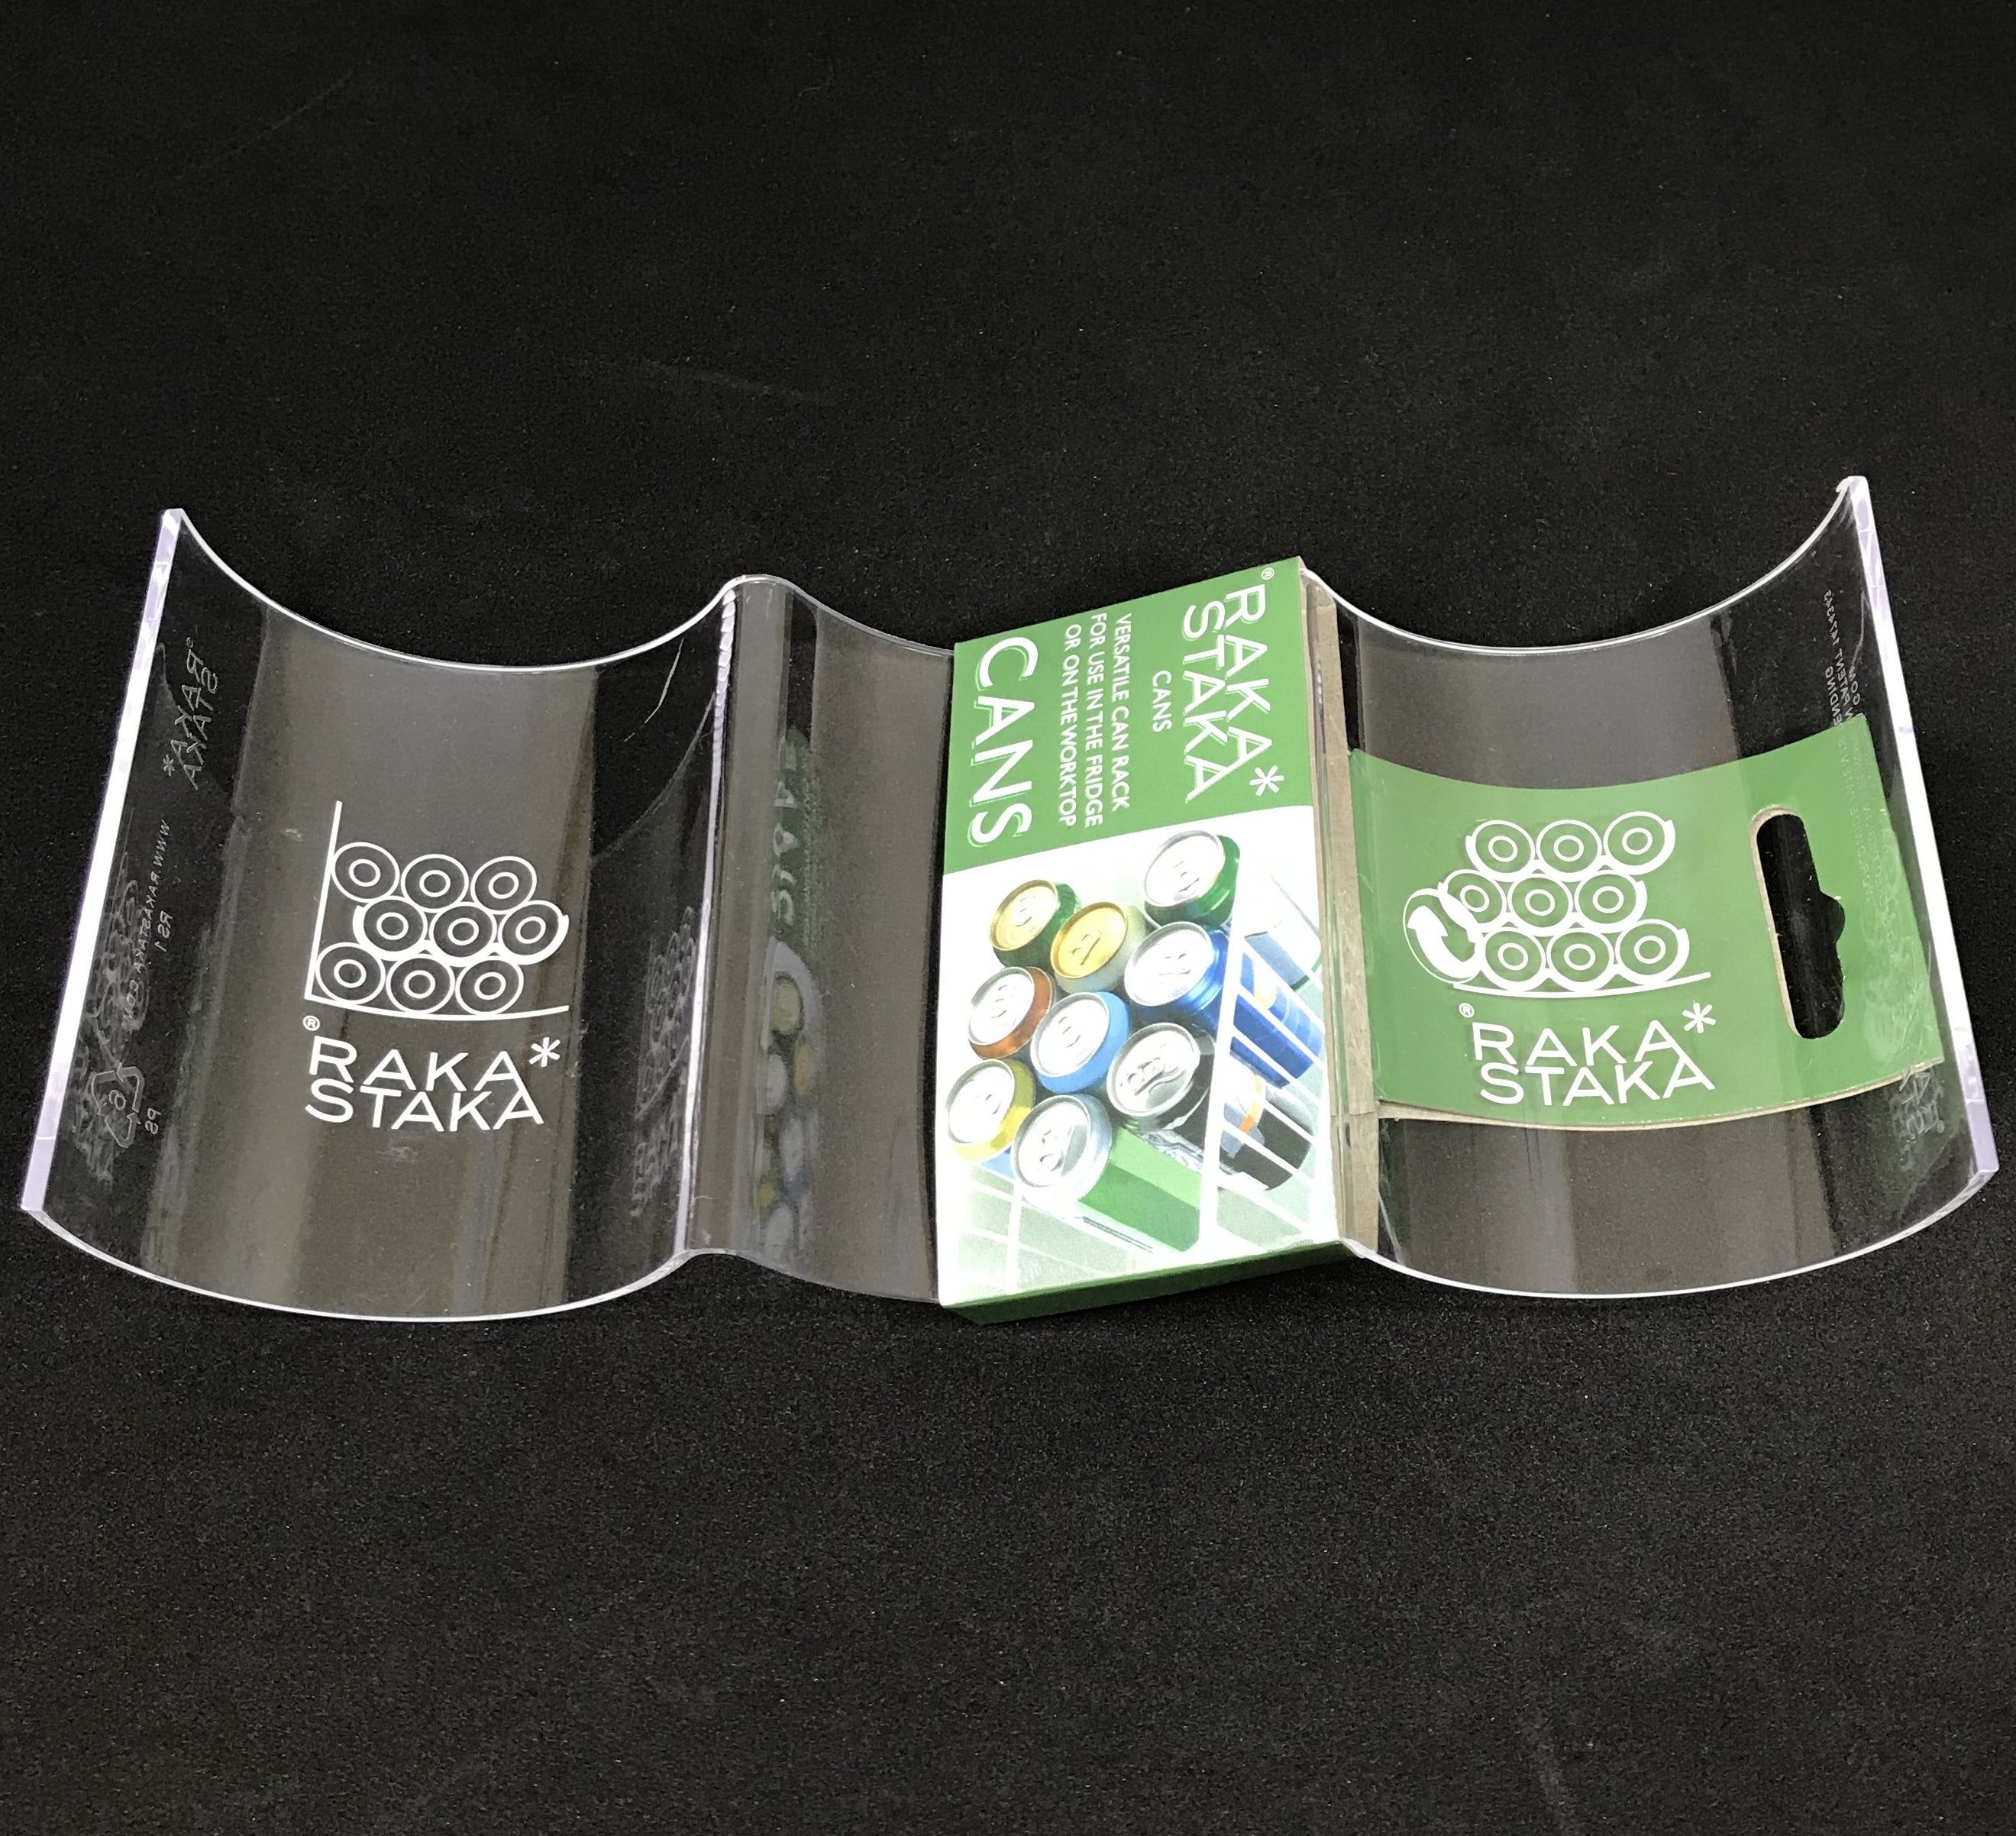 RakaStaka Cans - Space-Saving Beer and Soda Can Rack Ideal for in the Fridge (1 x Pack of 1) Supports 6+ Cans - As featured on Dragons' Den